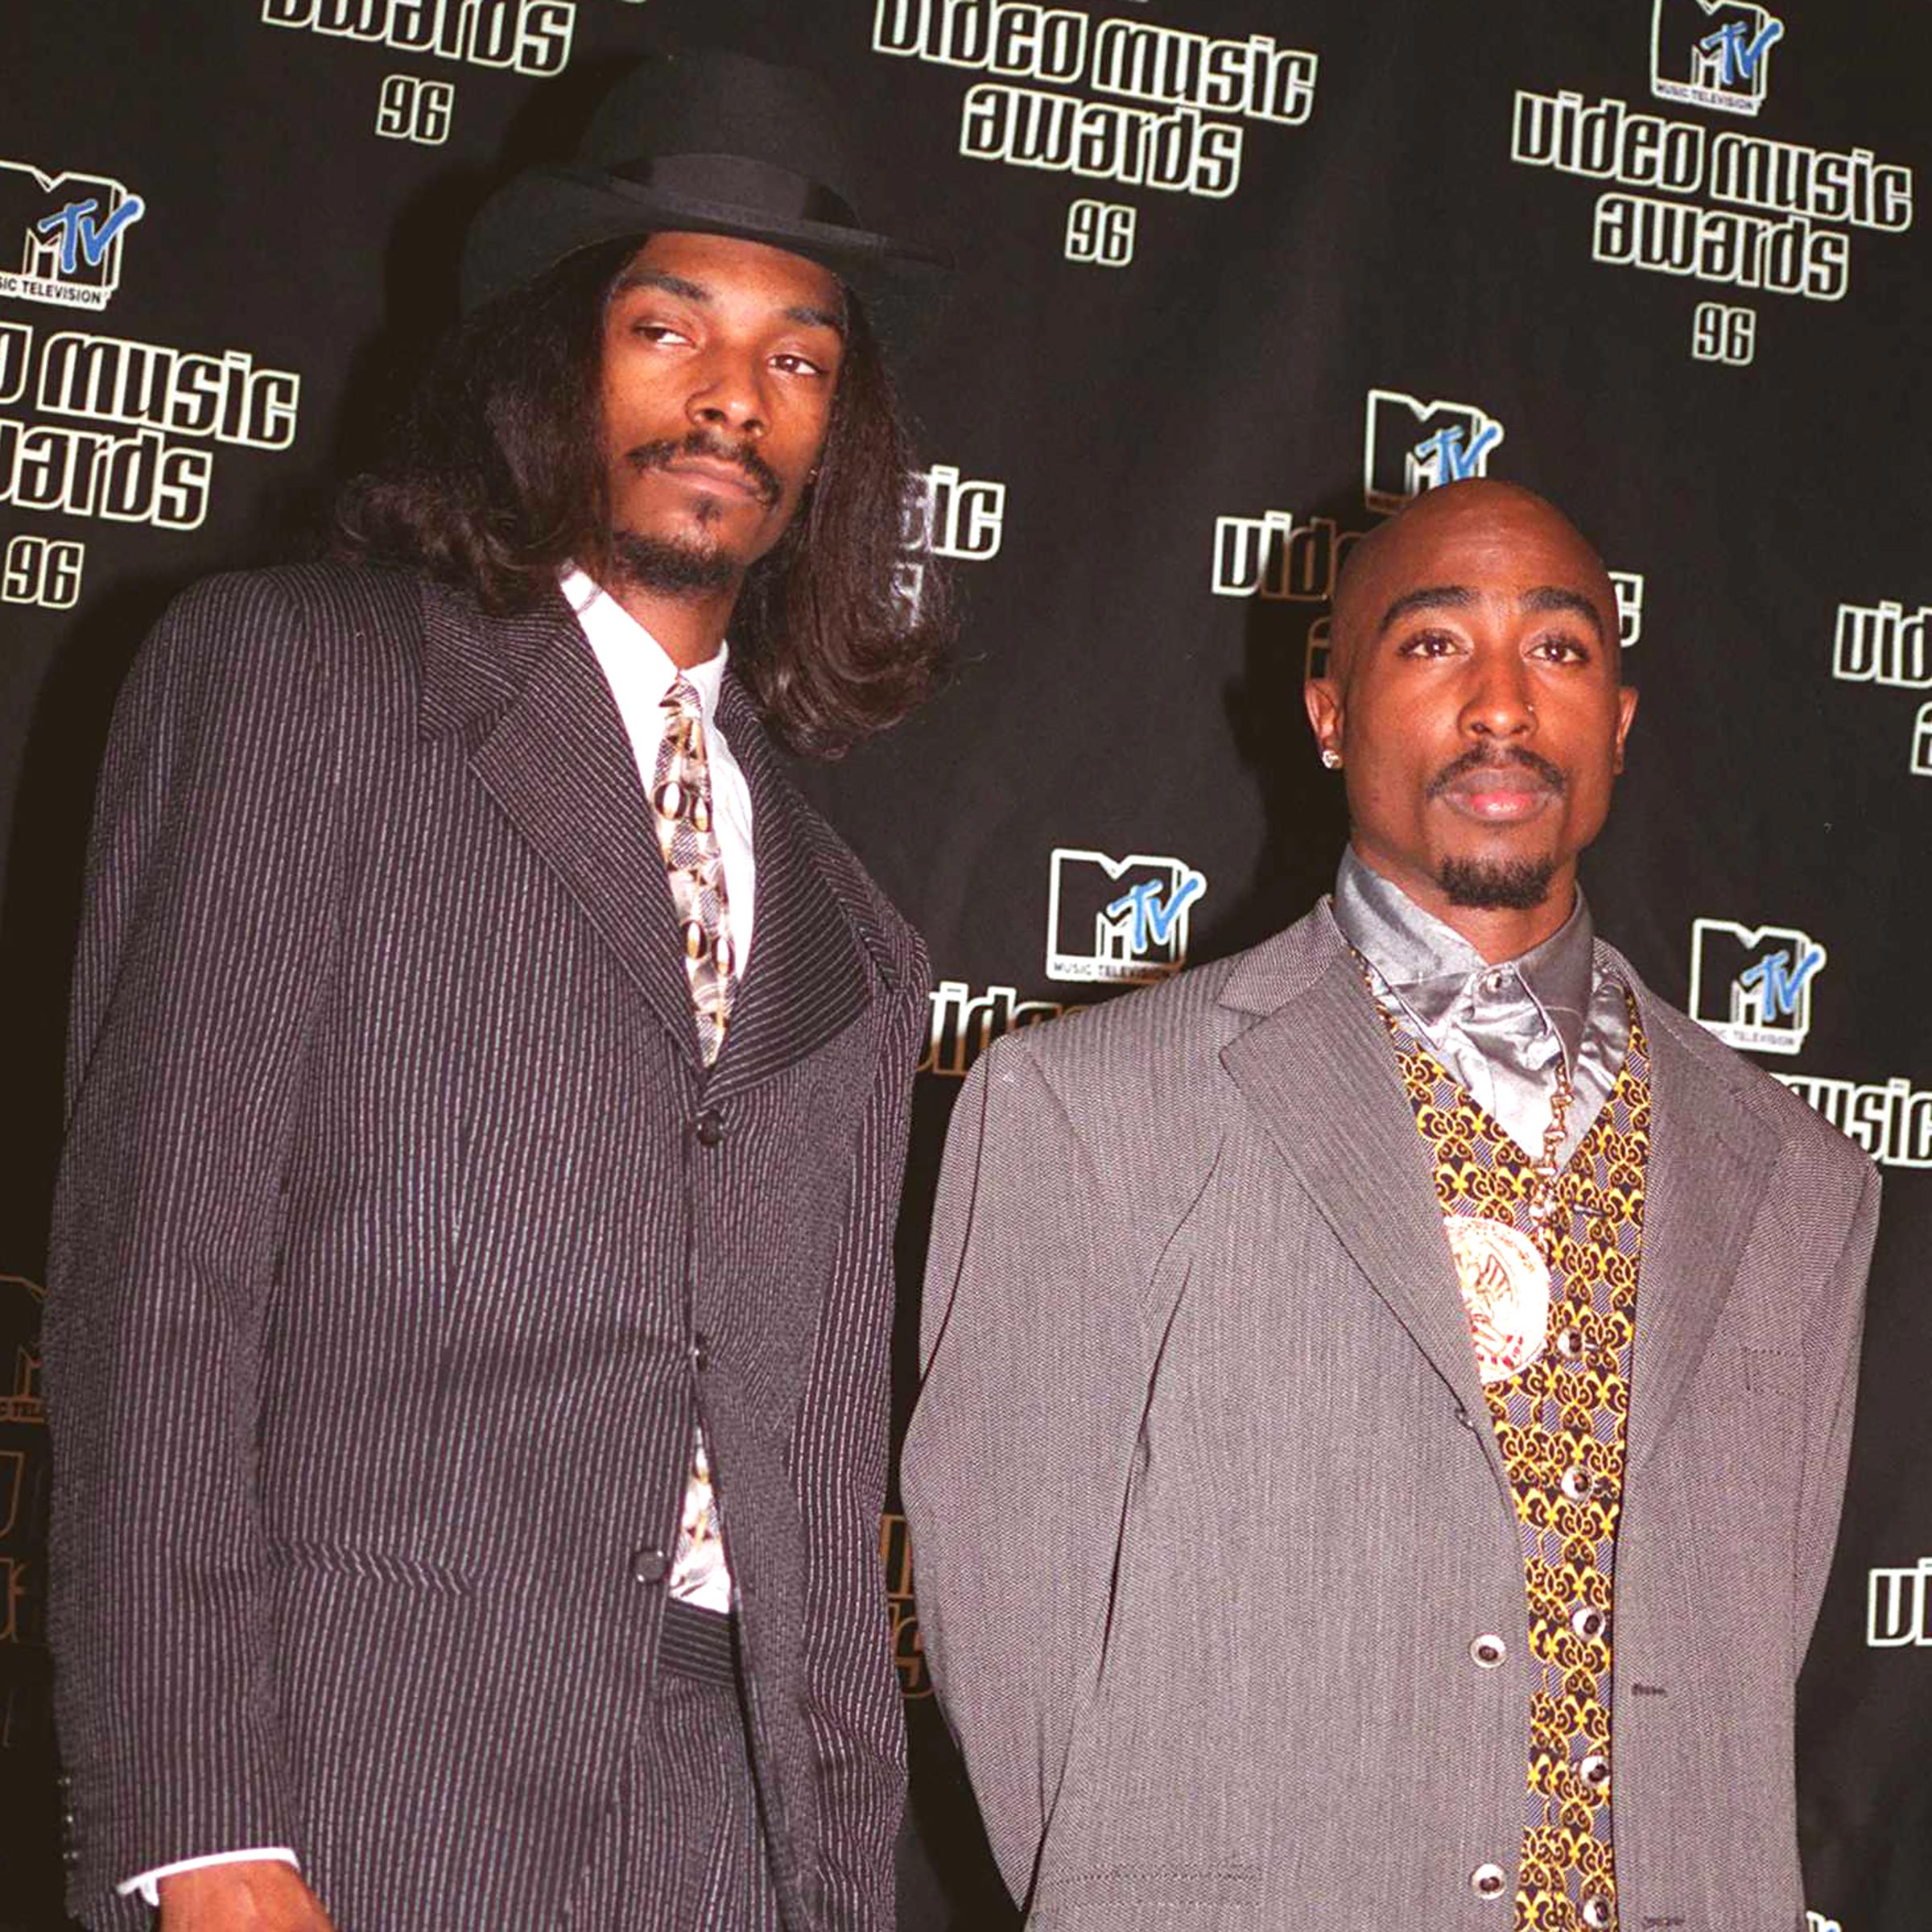 Snoop Dogg Will Induct Tupac Into Rock And Roll Hall Of Fame
